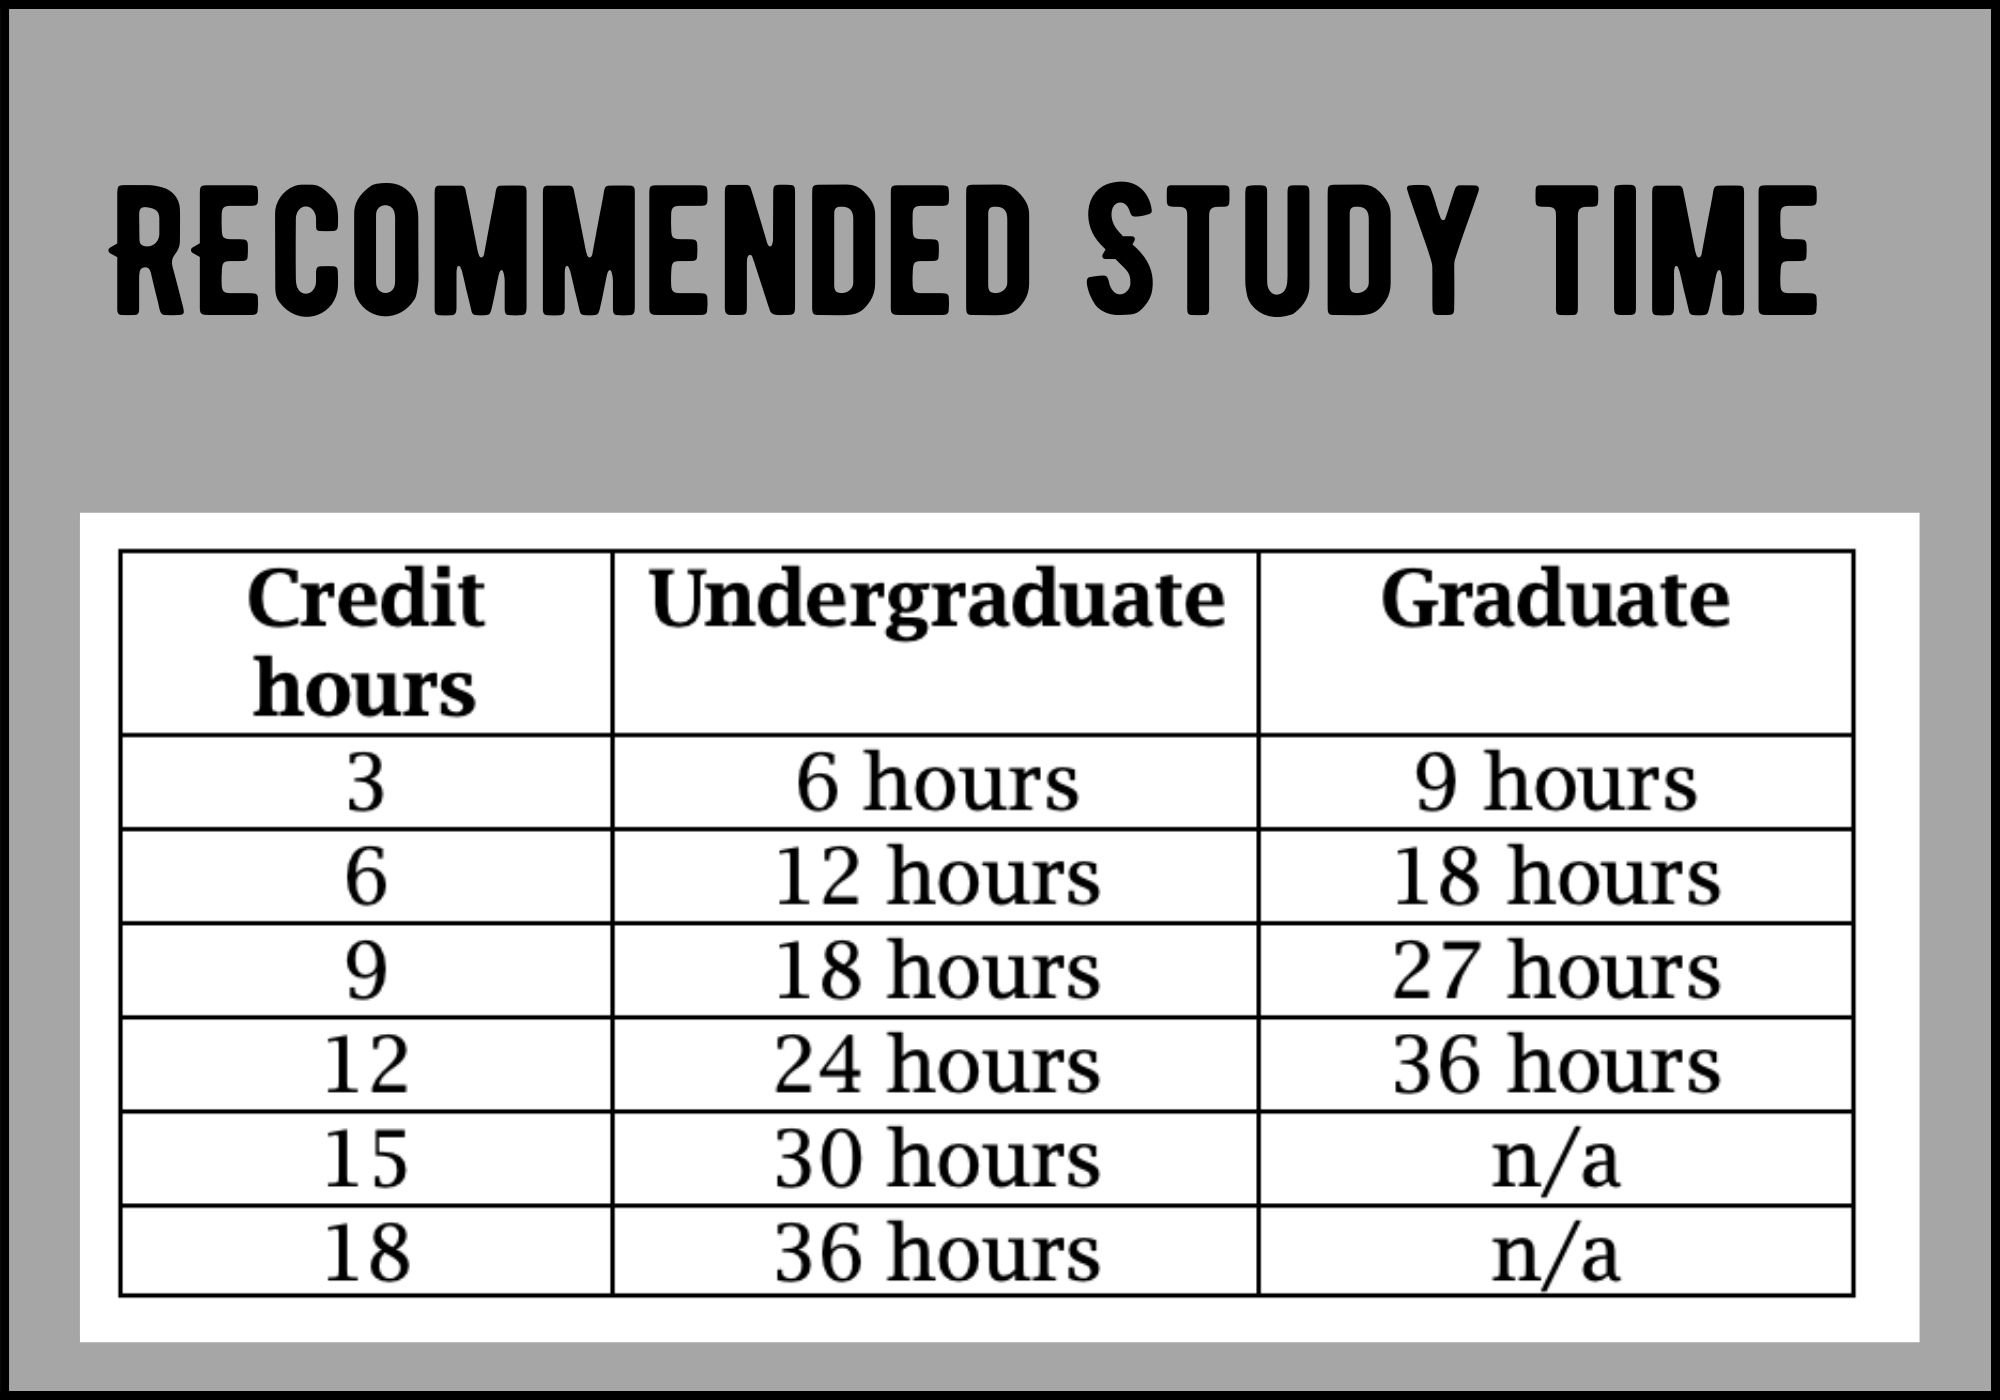 a chart showing study time based on credit hours for undergraduate and graduate level courses and the results are discussed below